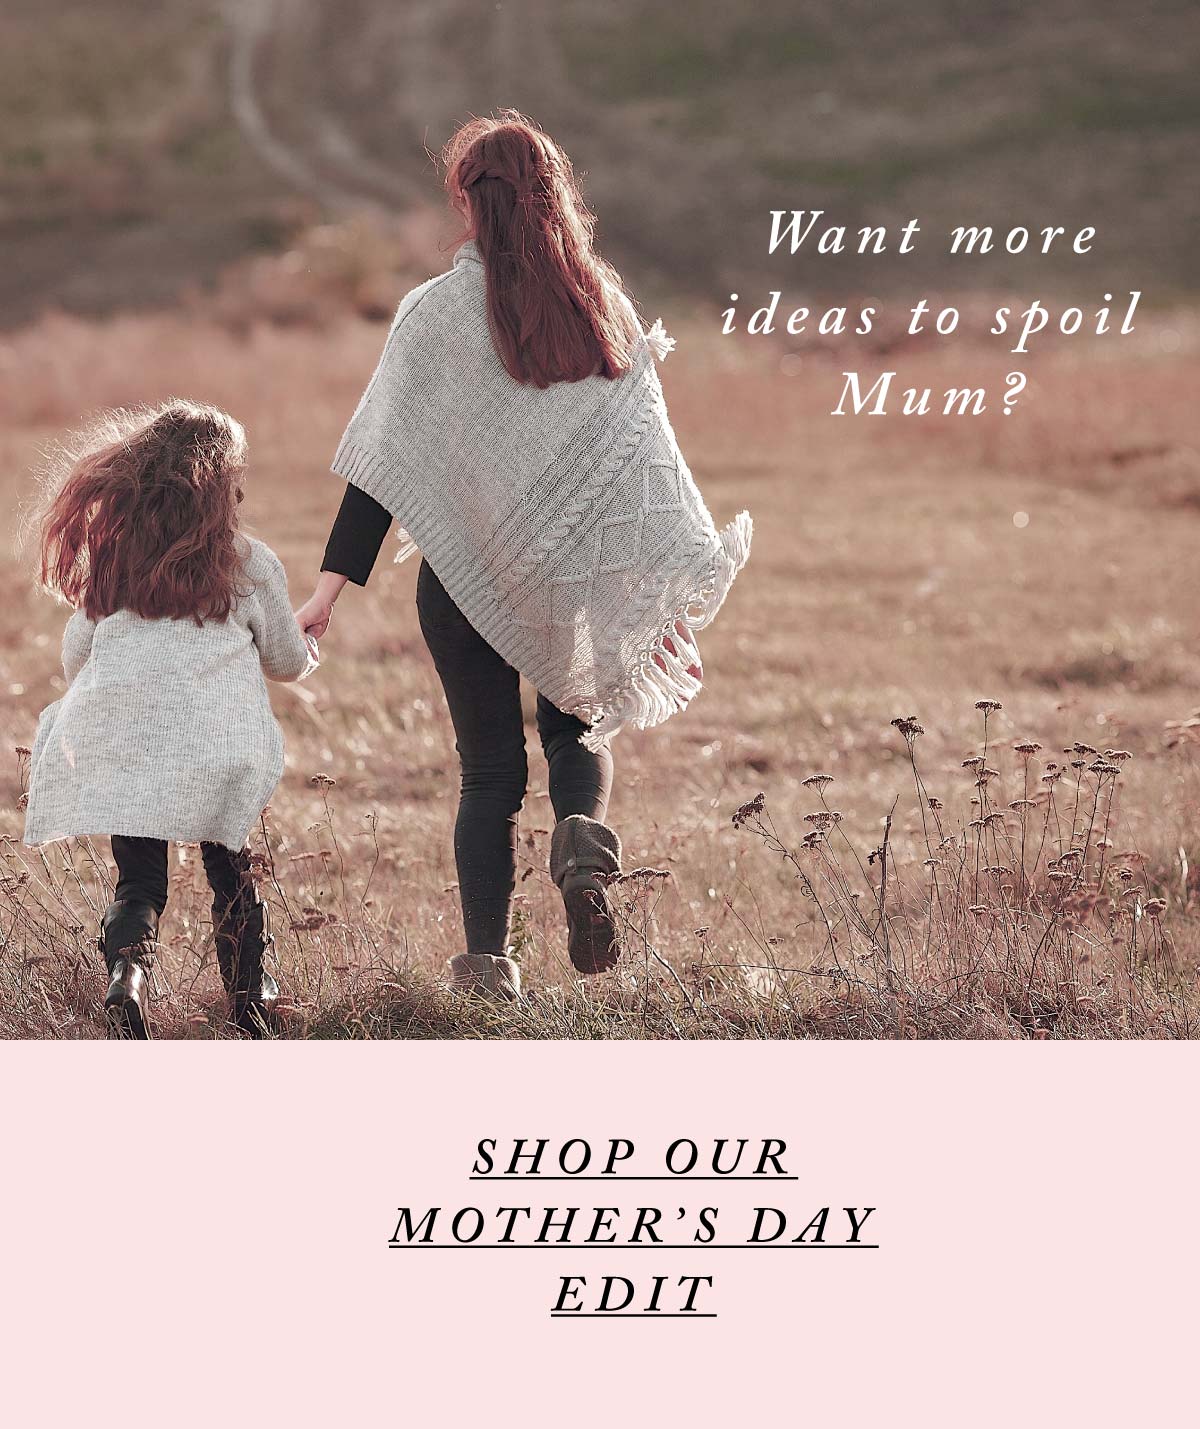 The Perfect Gifts For Mother's Day